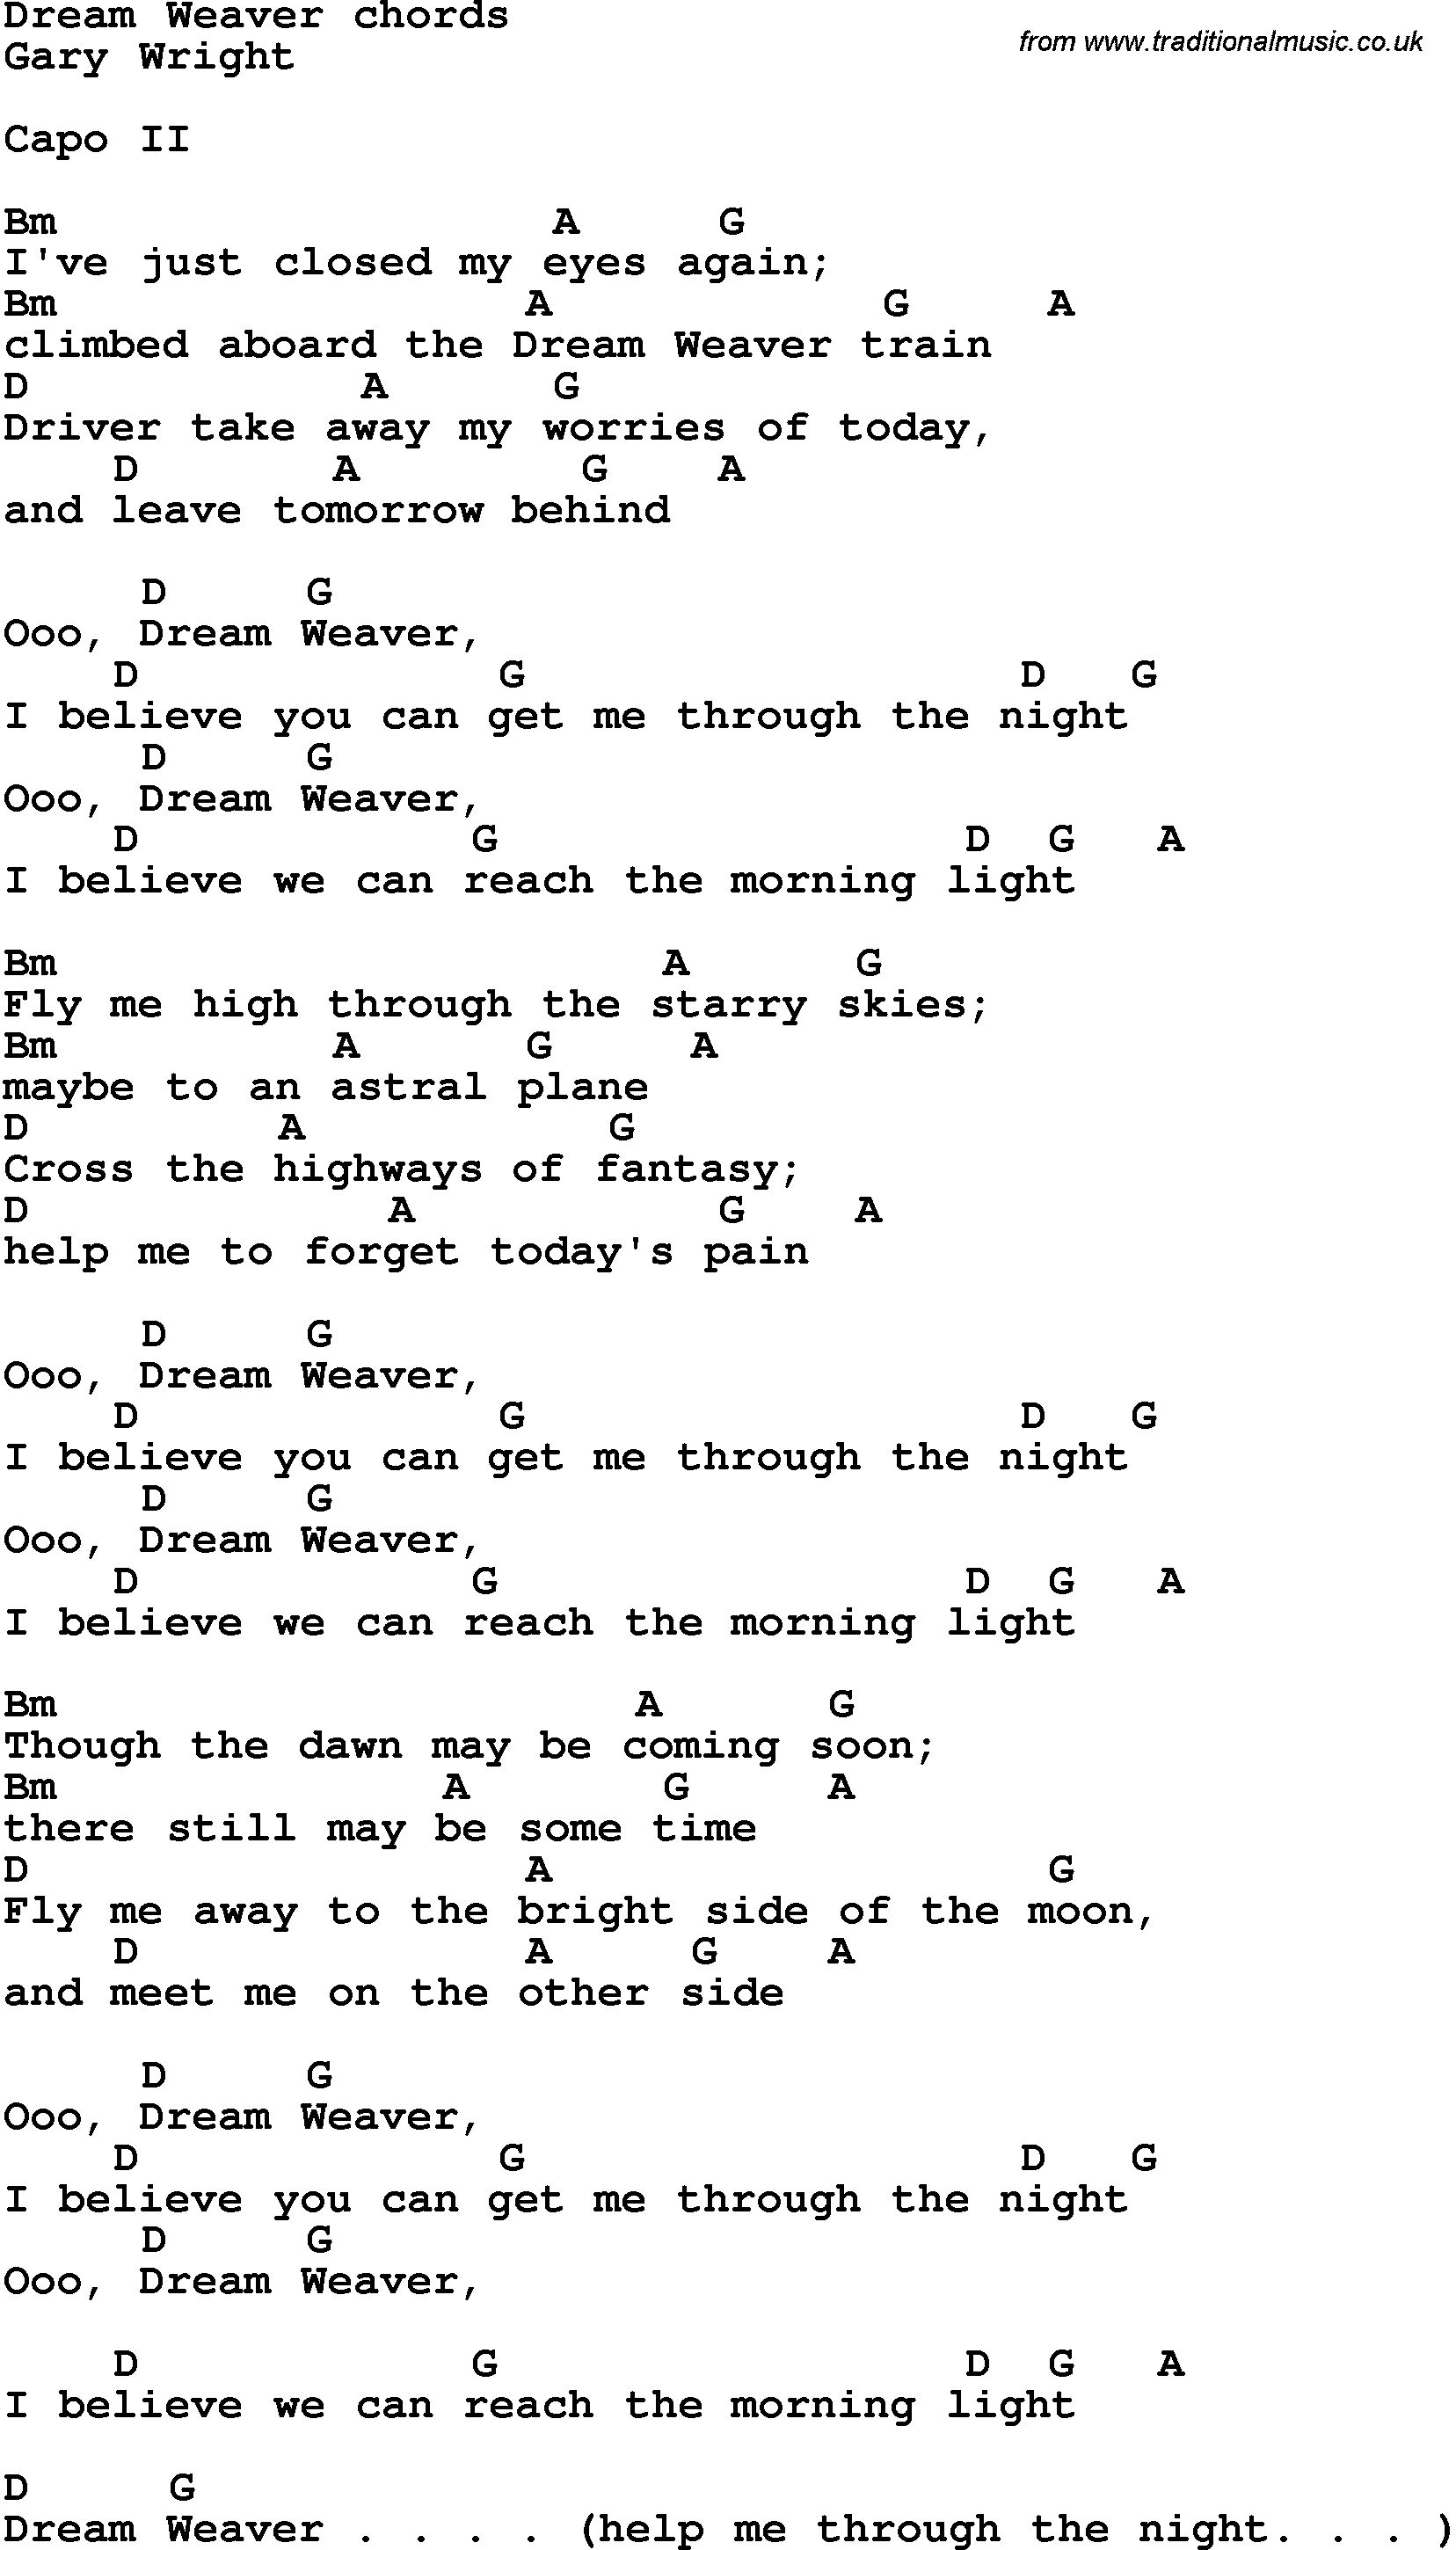 Song Lyrics with guitar chords for Dream Weaver